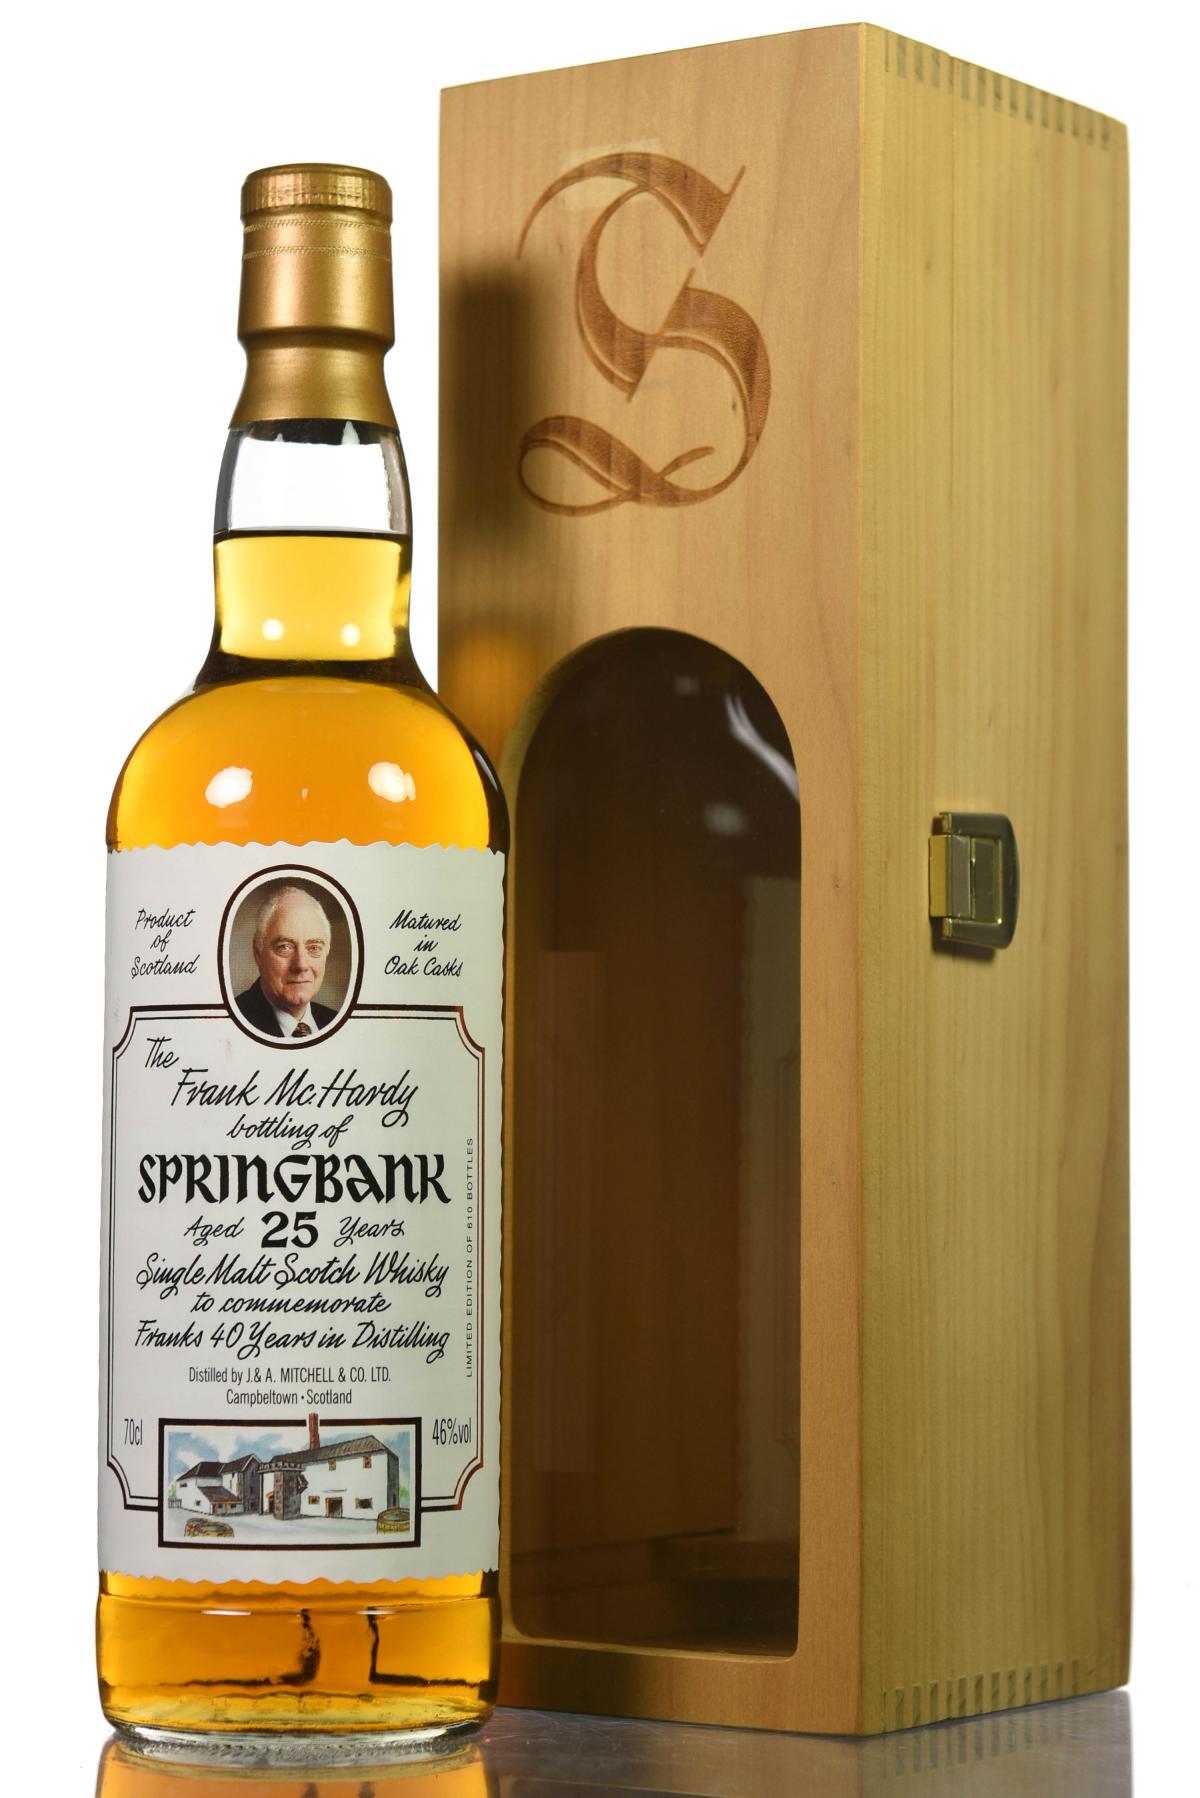 Springbank 25 Year Old - Frank McHardy 40 Years In Distilling